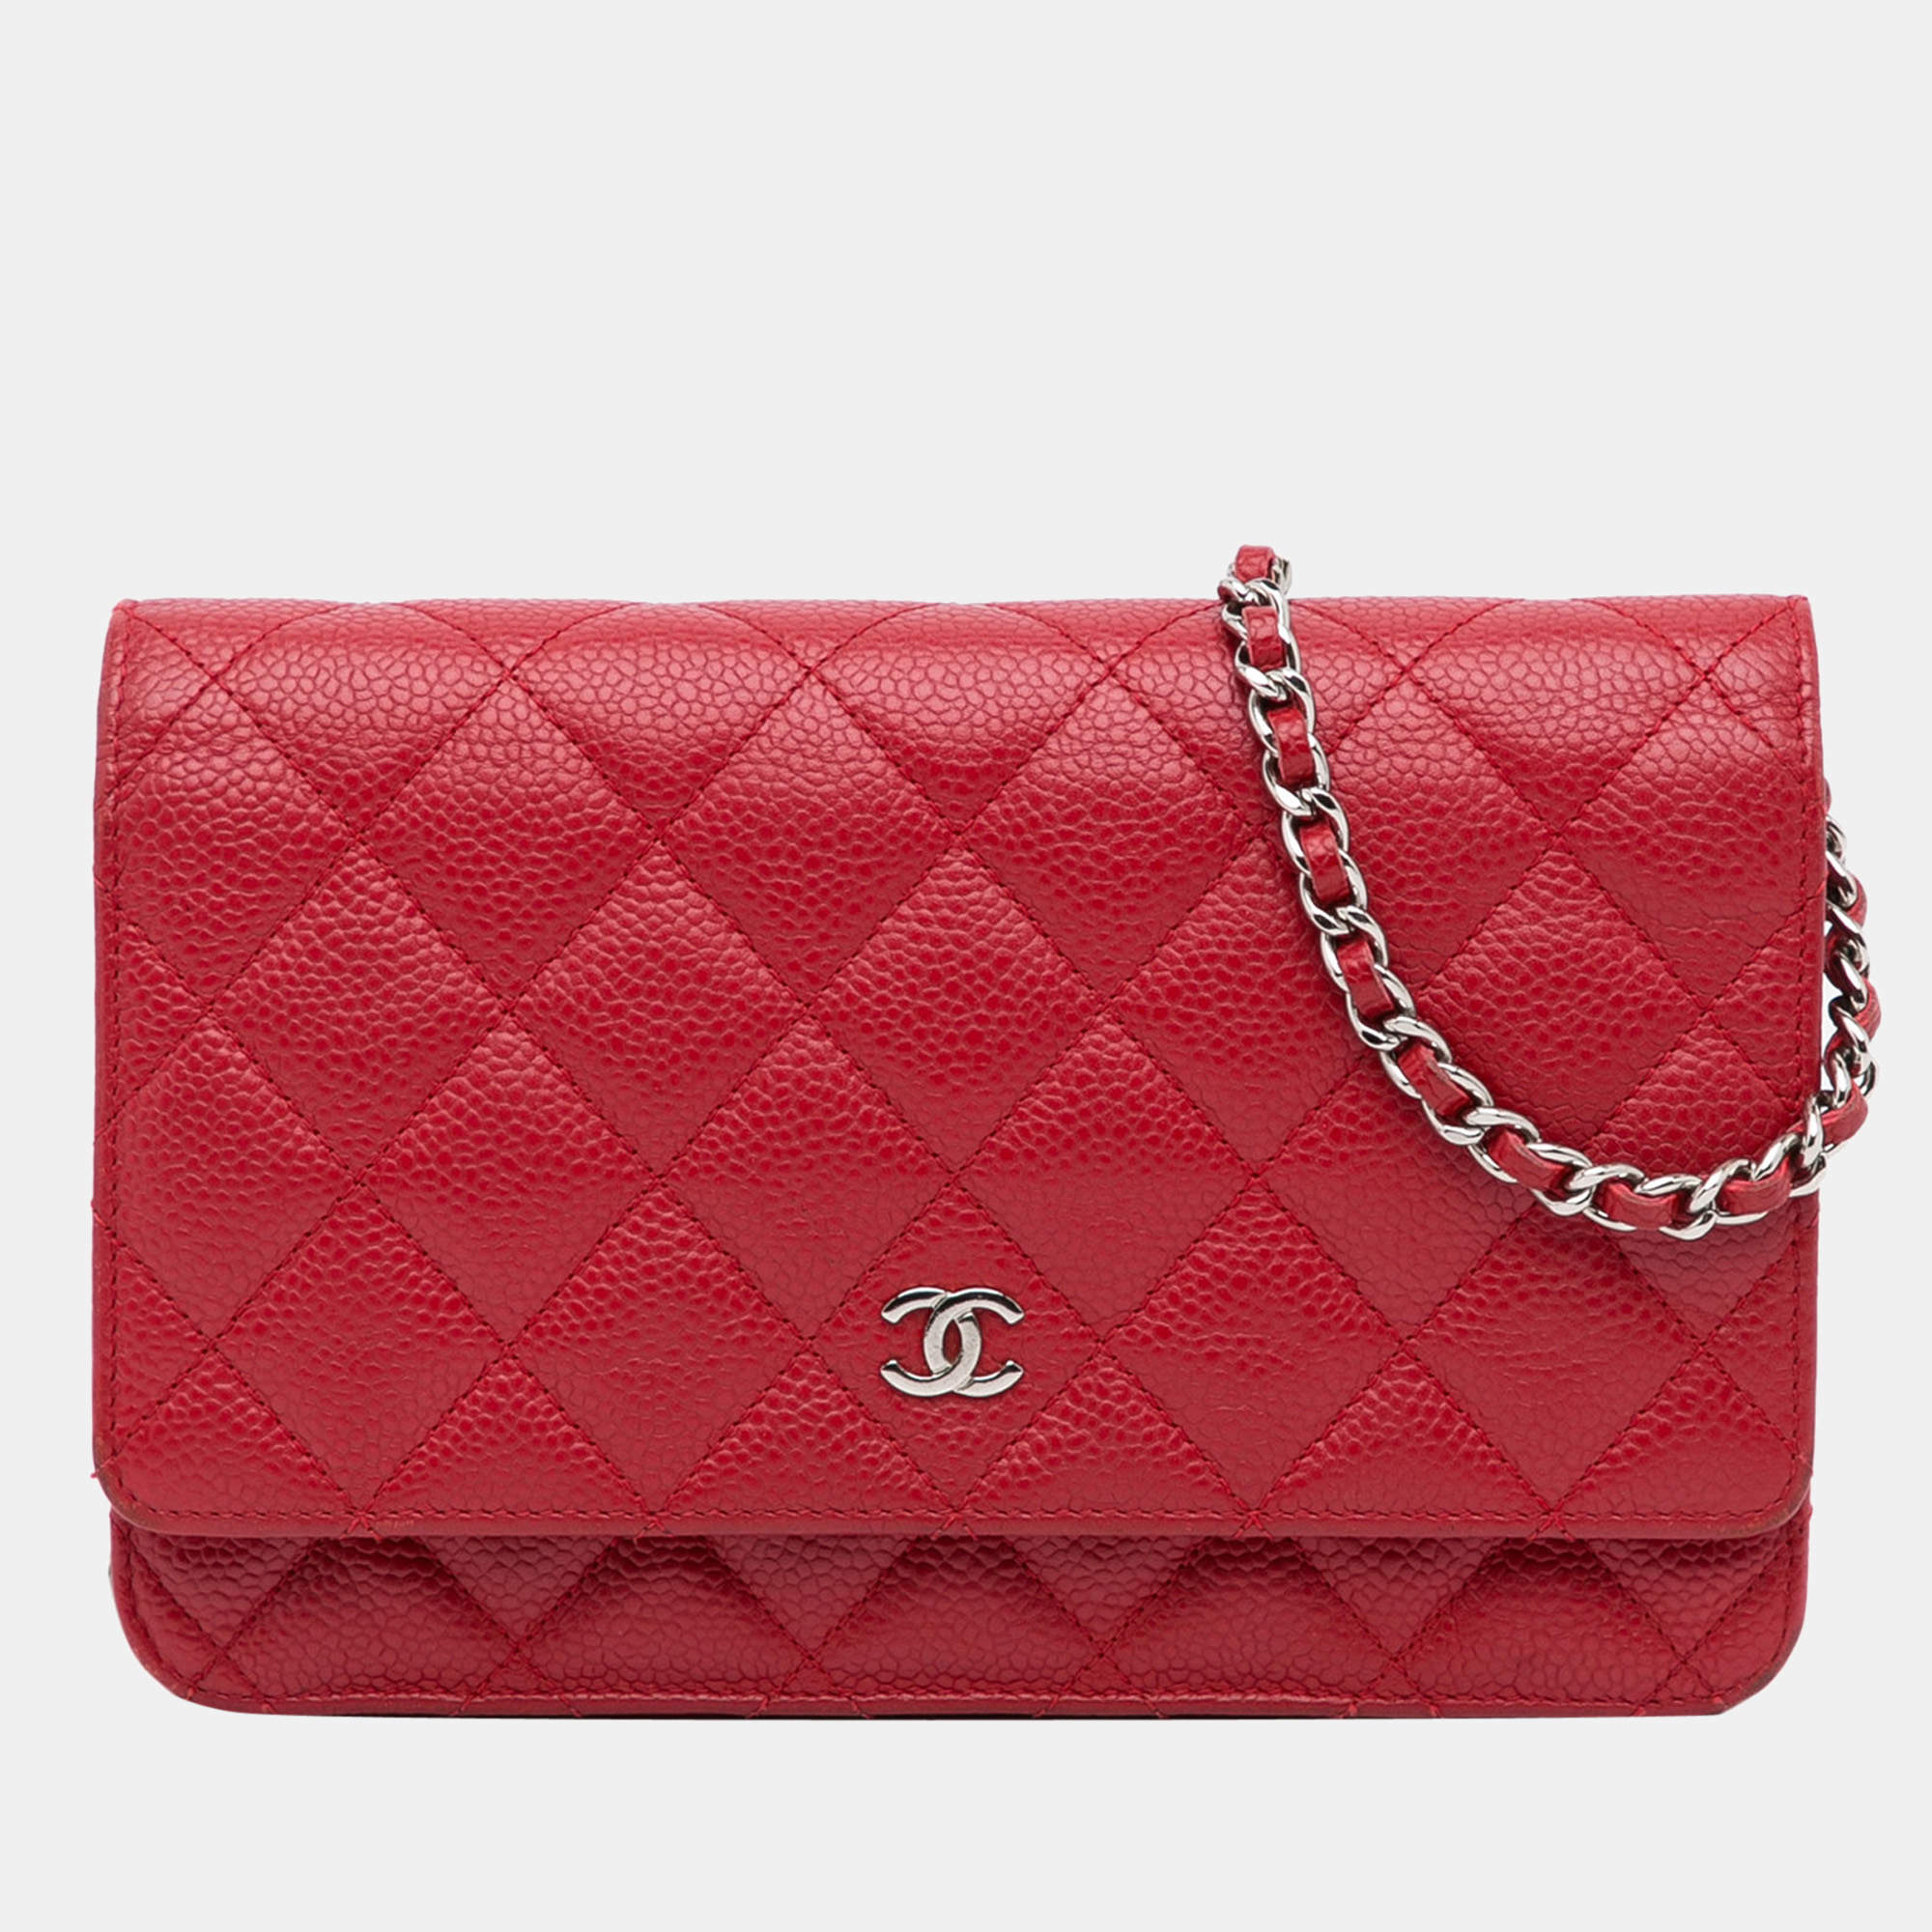 Chanel Red Caviar Wallet On Chain Chanel